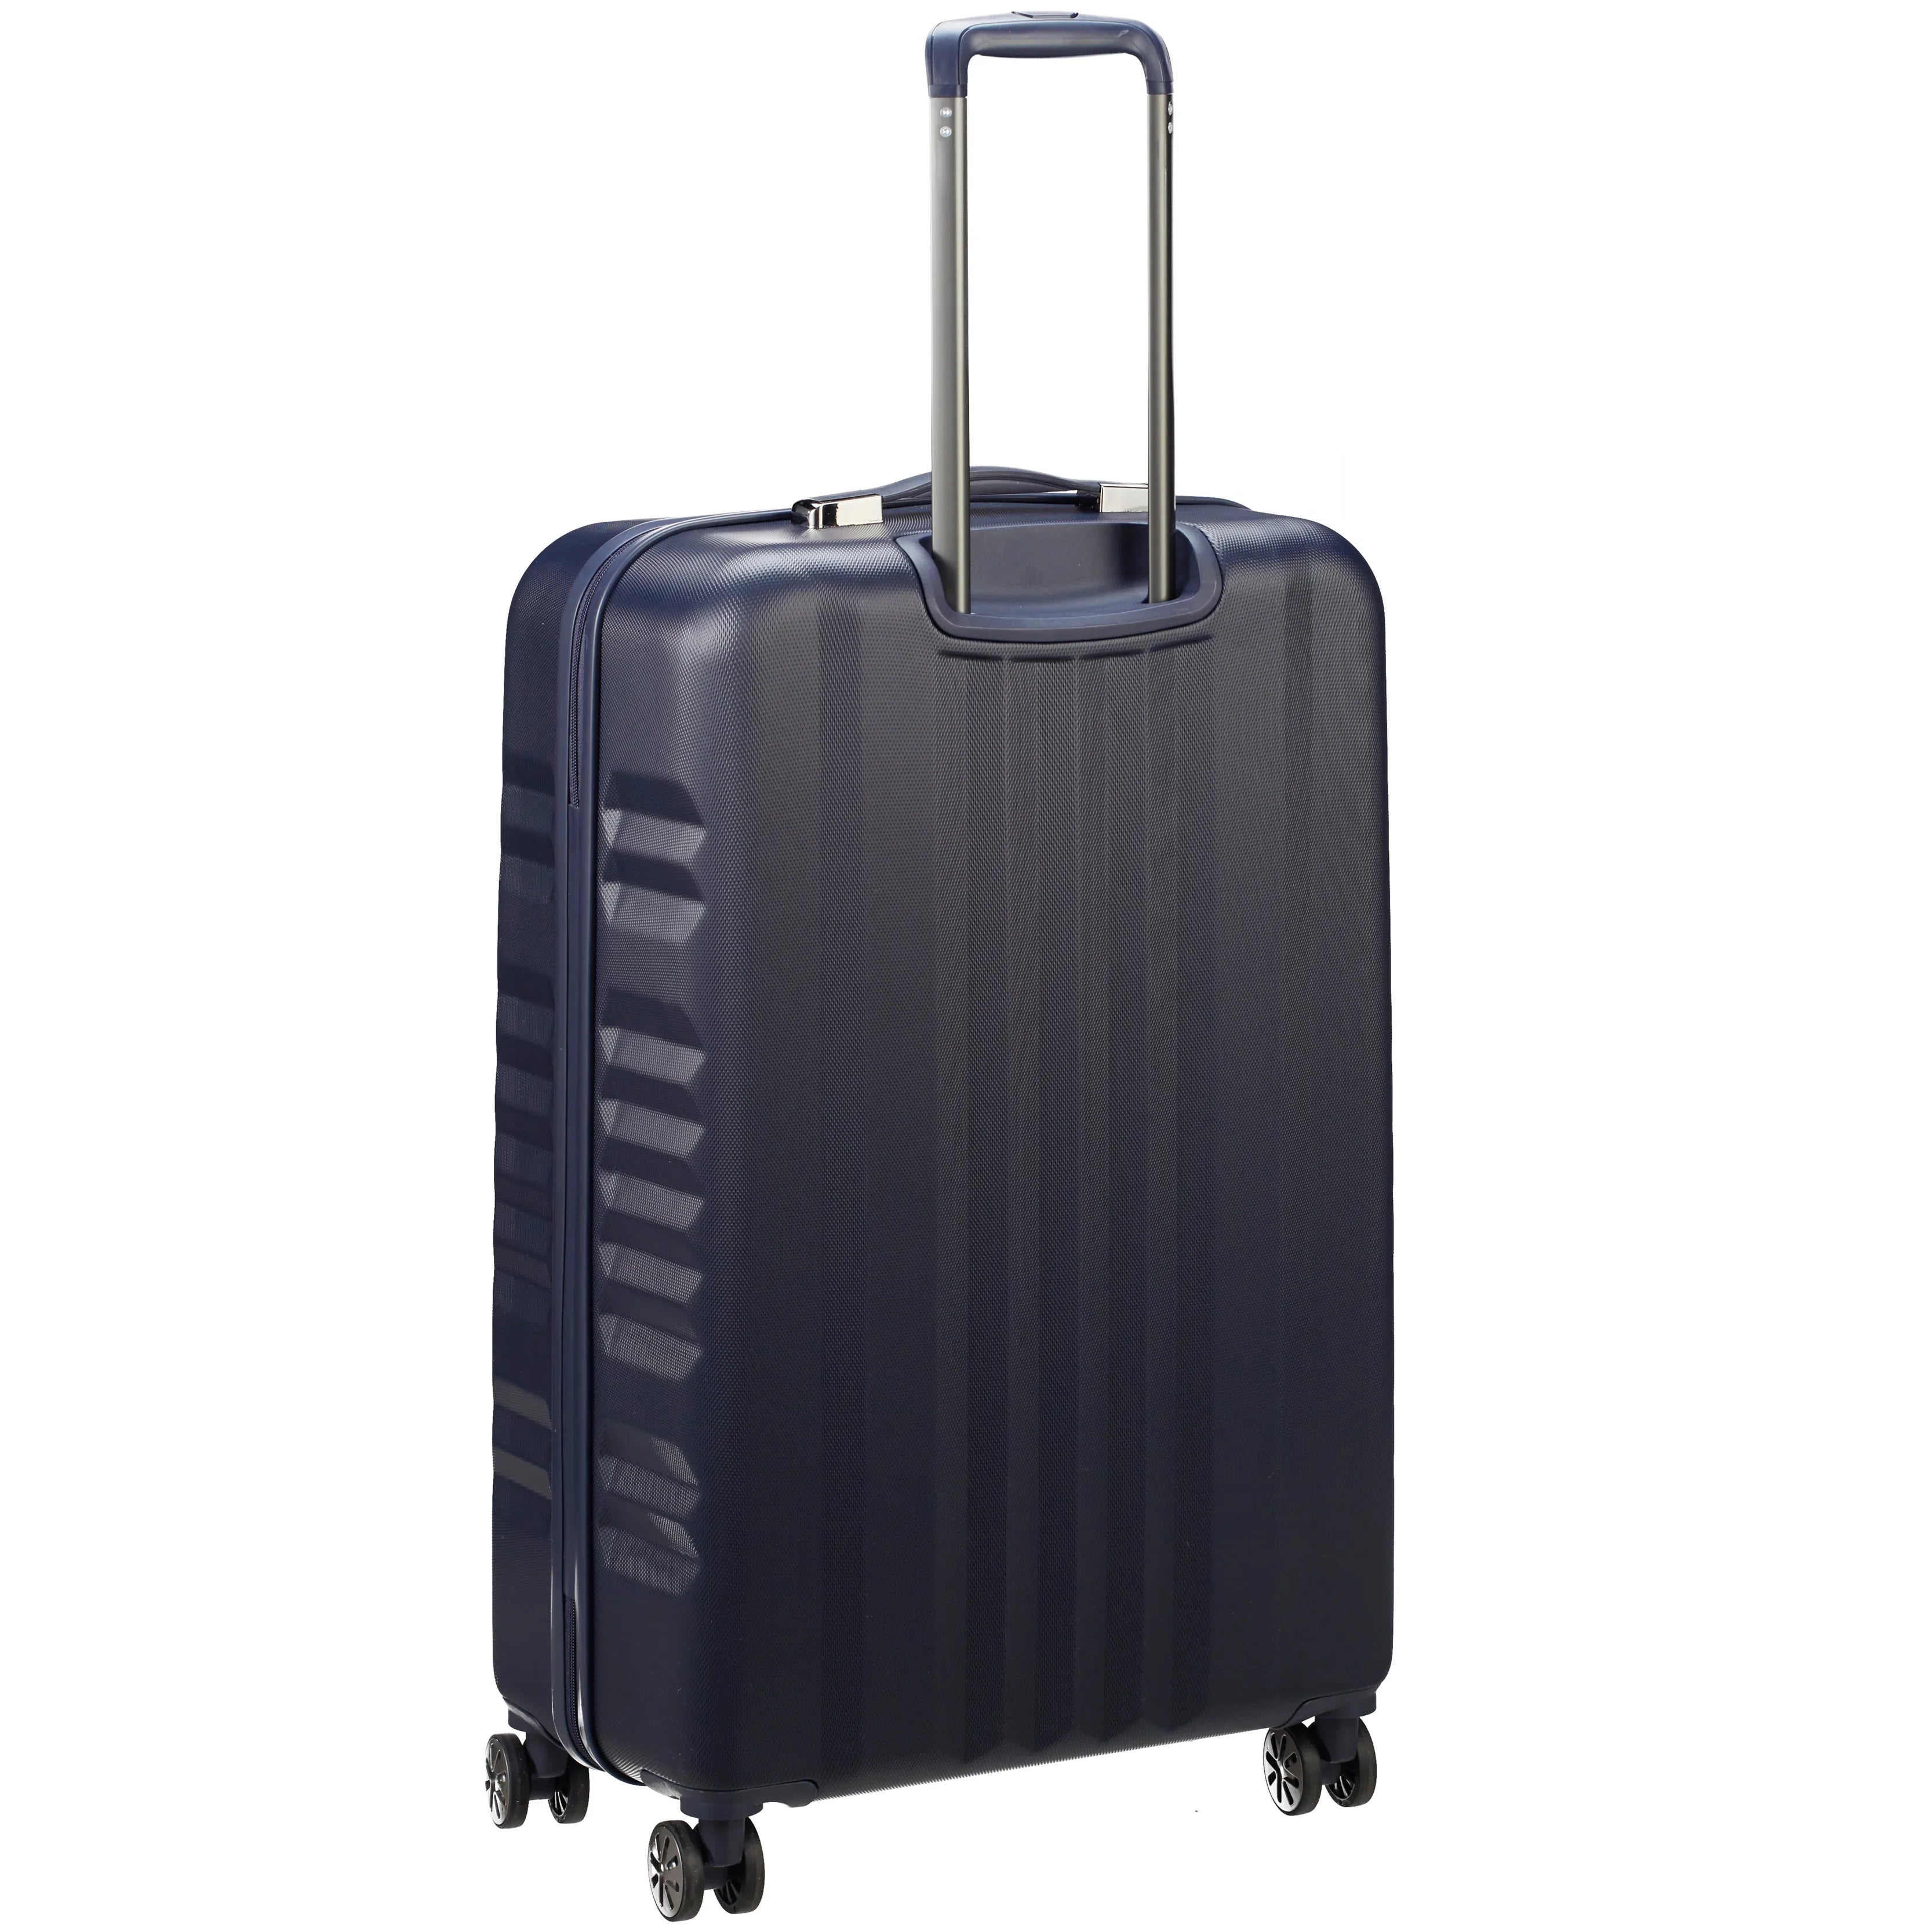 March 15 Trading Fly 4-wheel trolley 65 cm - black brushed